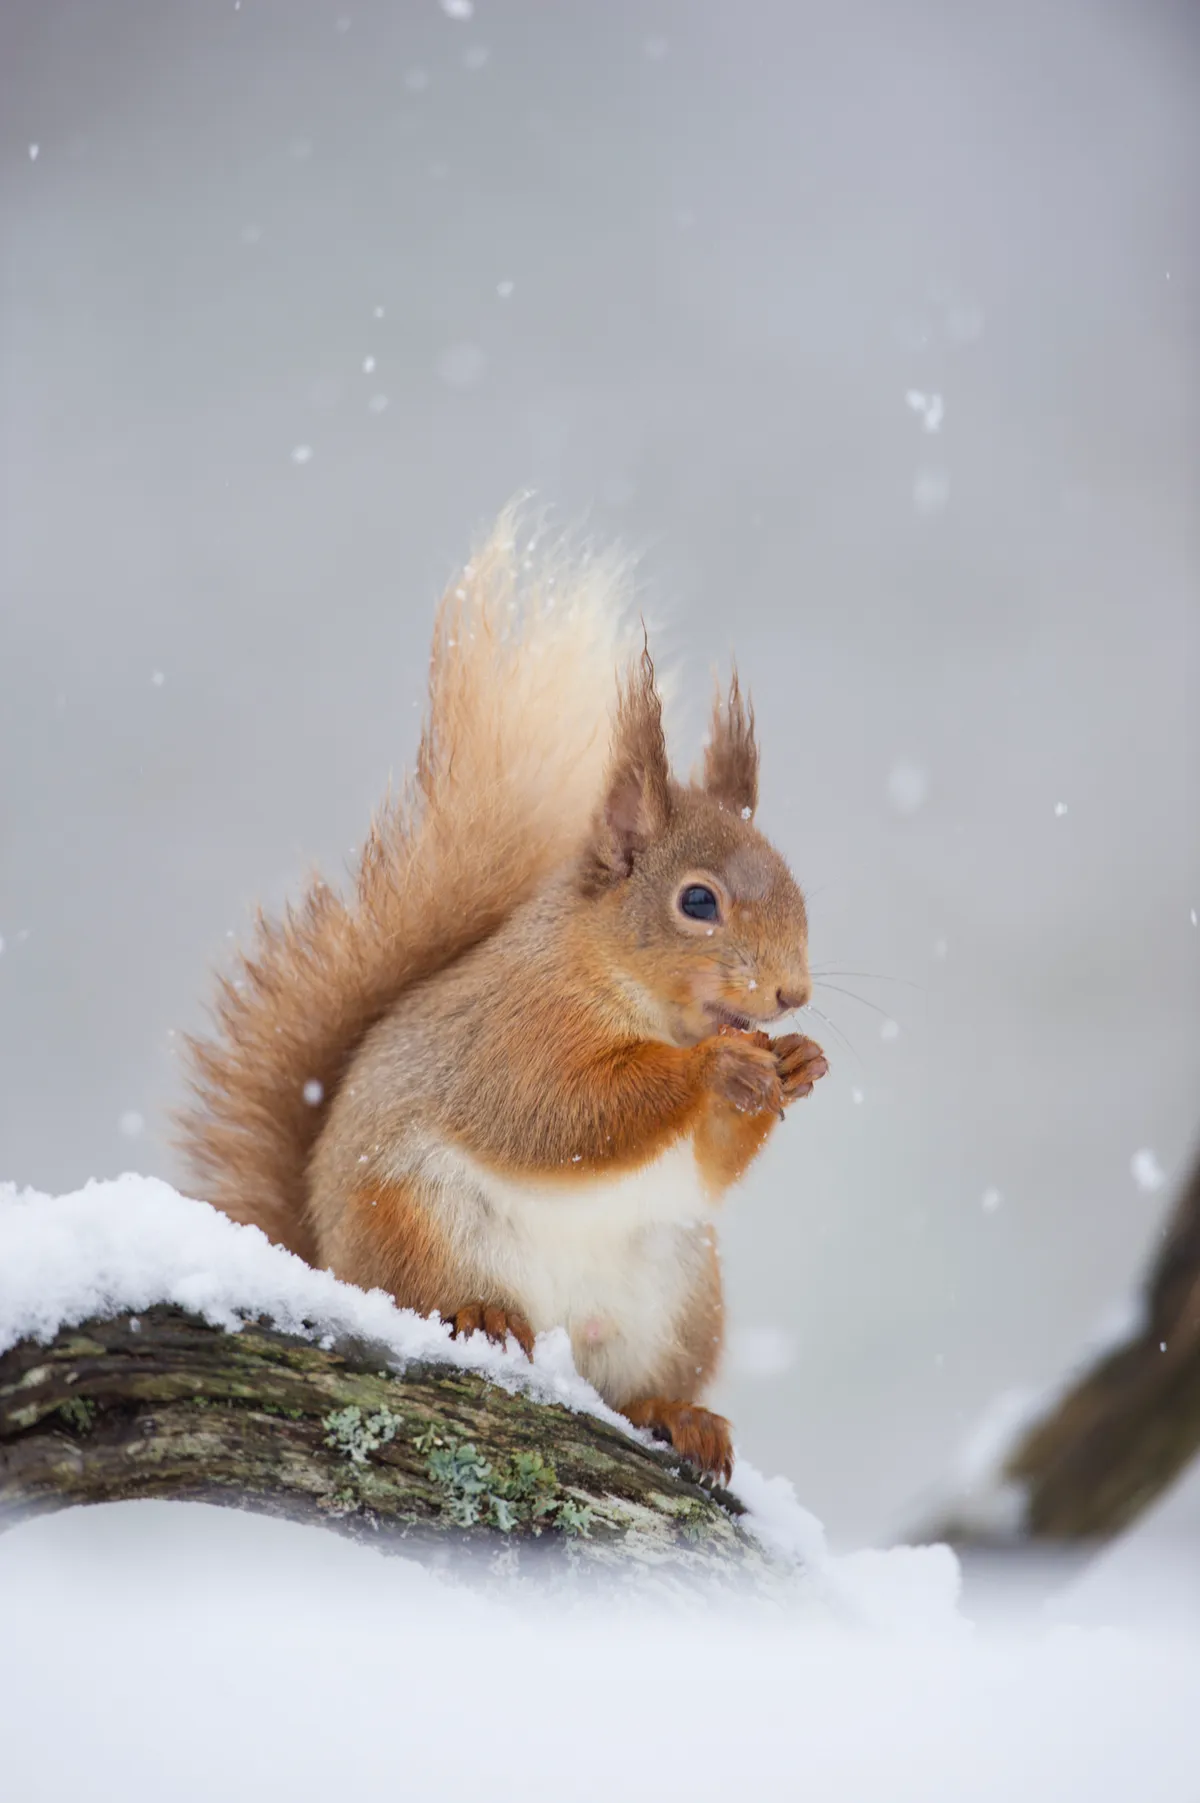 Red squirrel with nuts in mouth in the snow